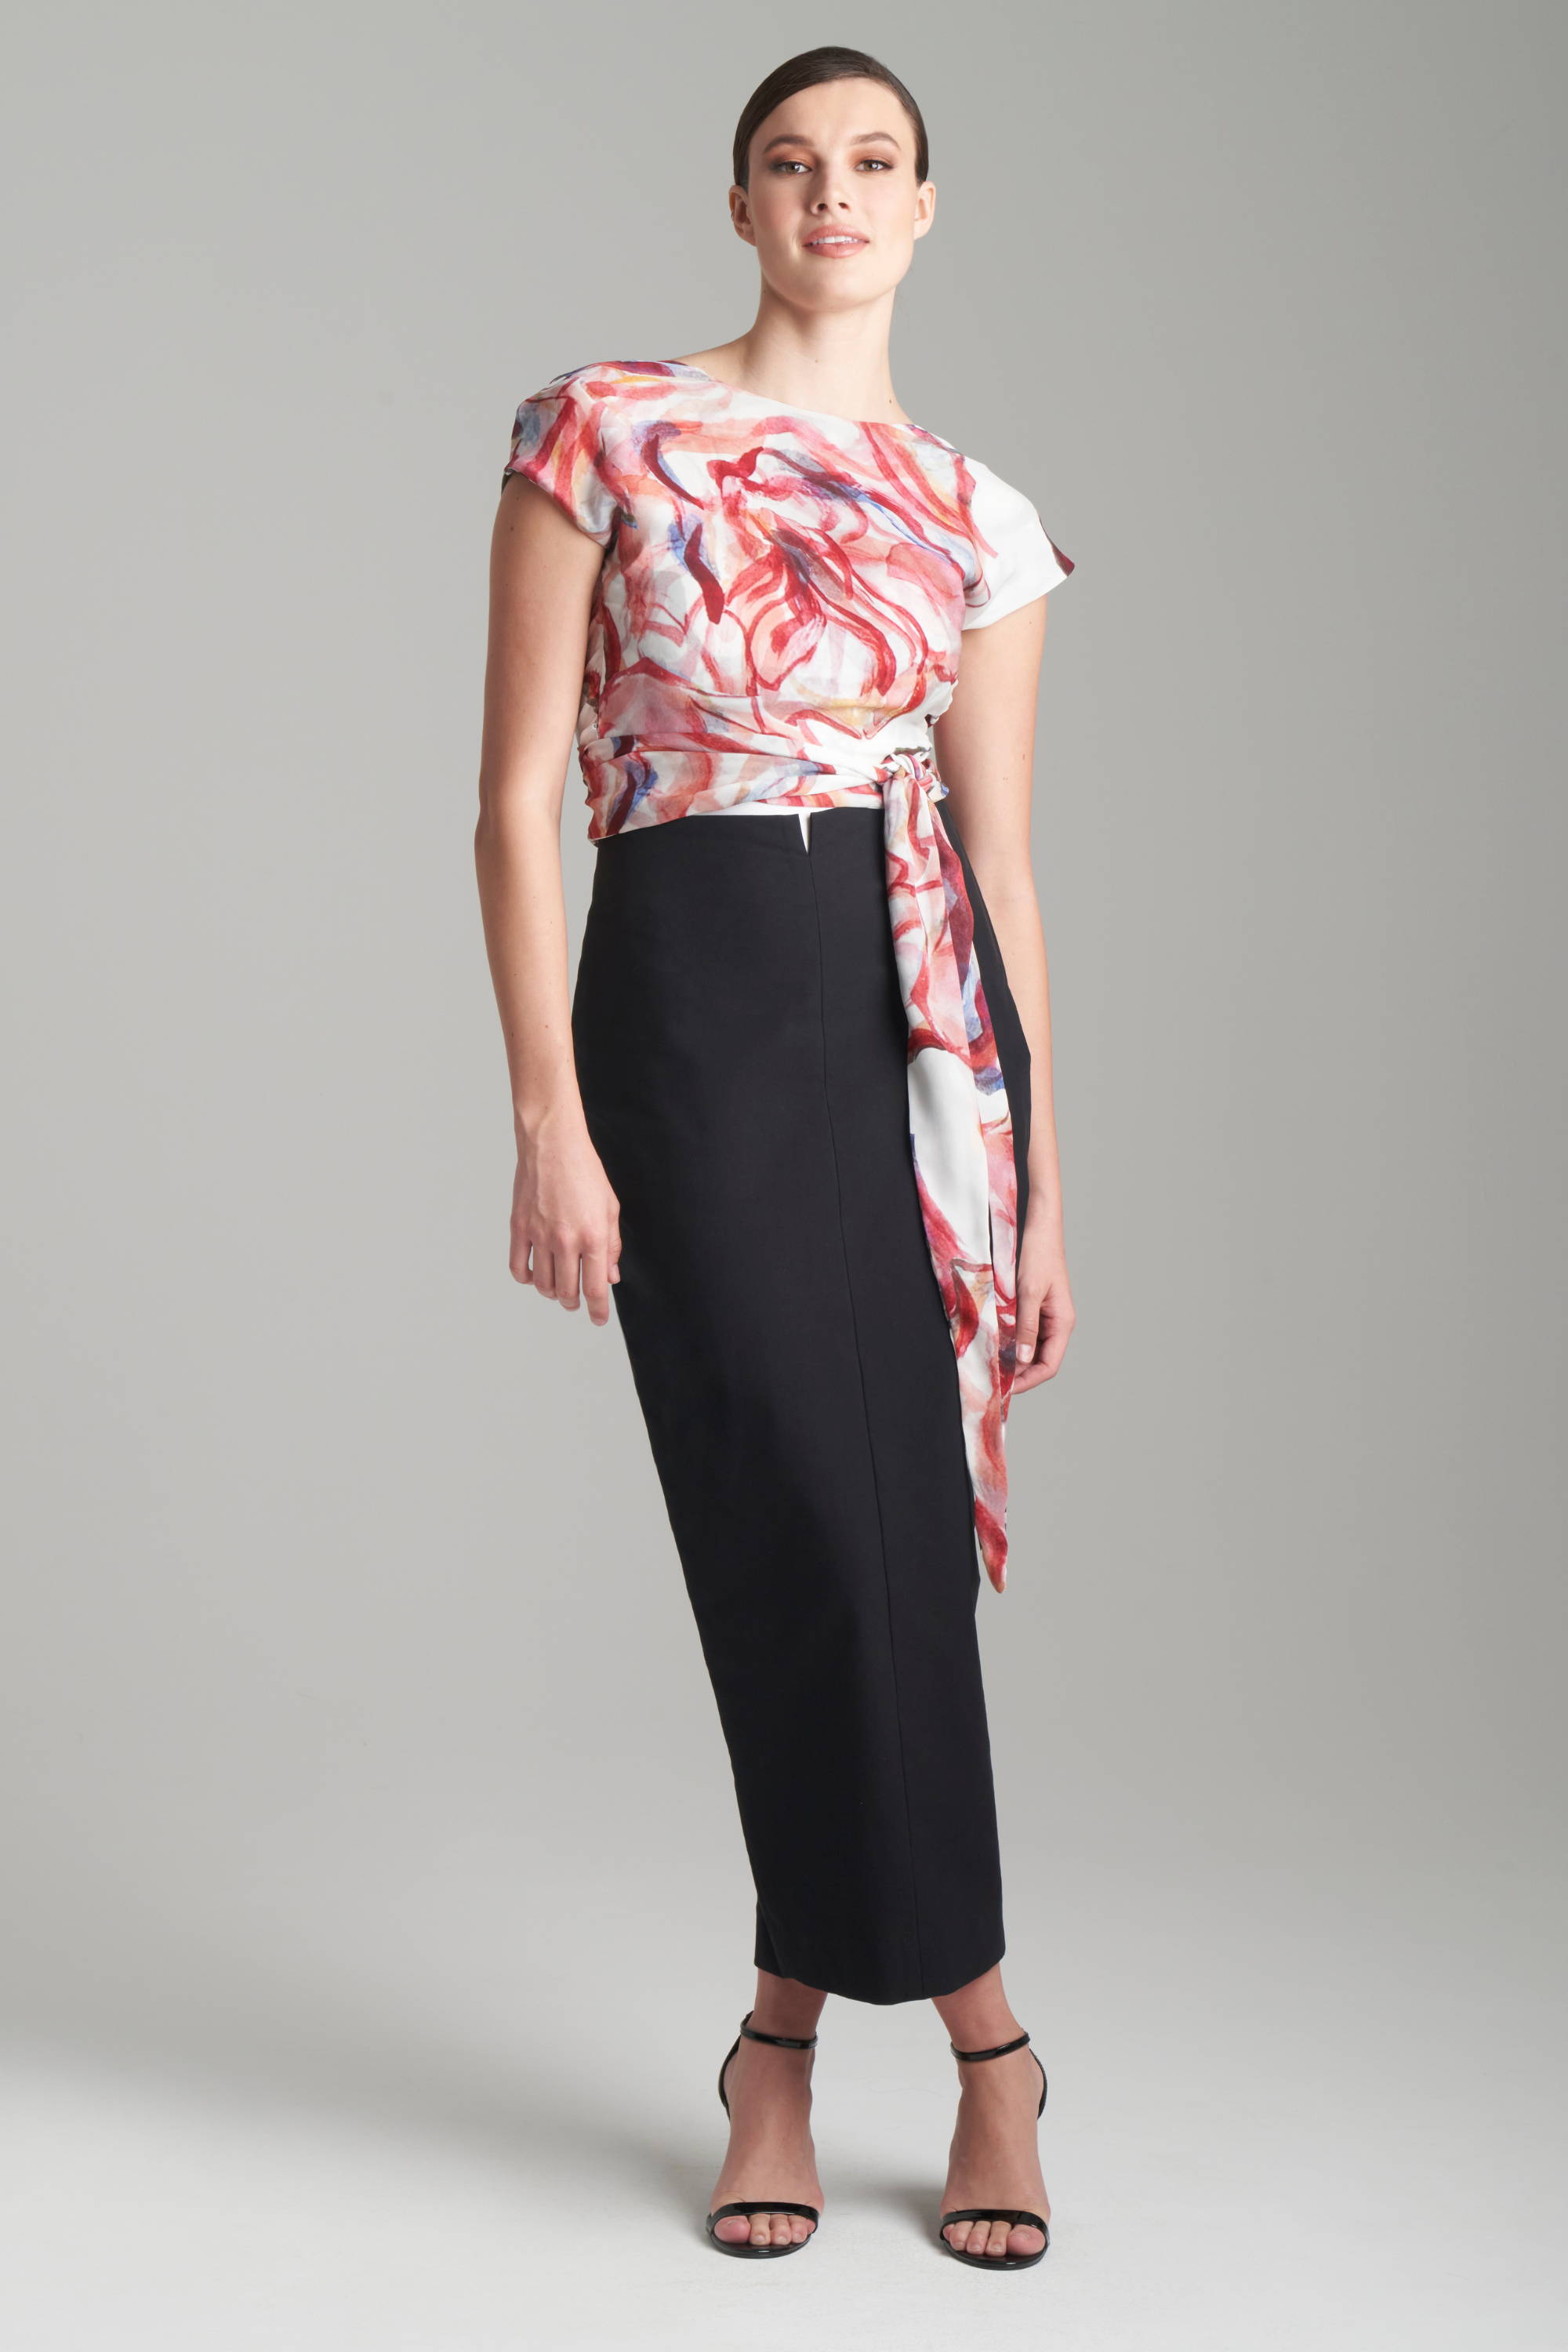 Woman wearing red and whtie rose printed reversible slk wrap top wth black pencil skirt by Ala von Auersperg